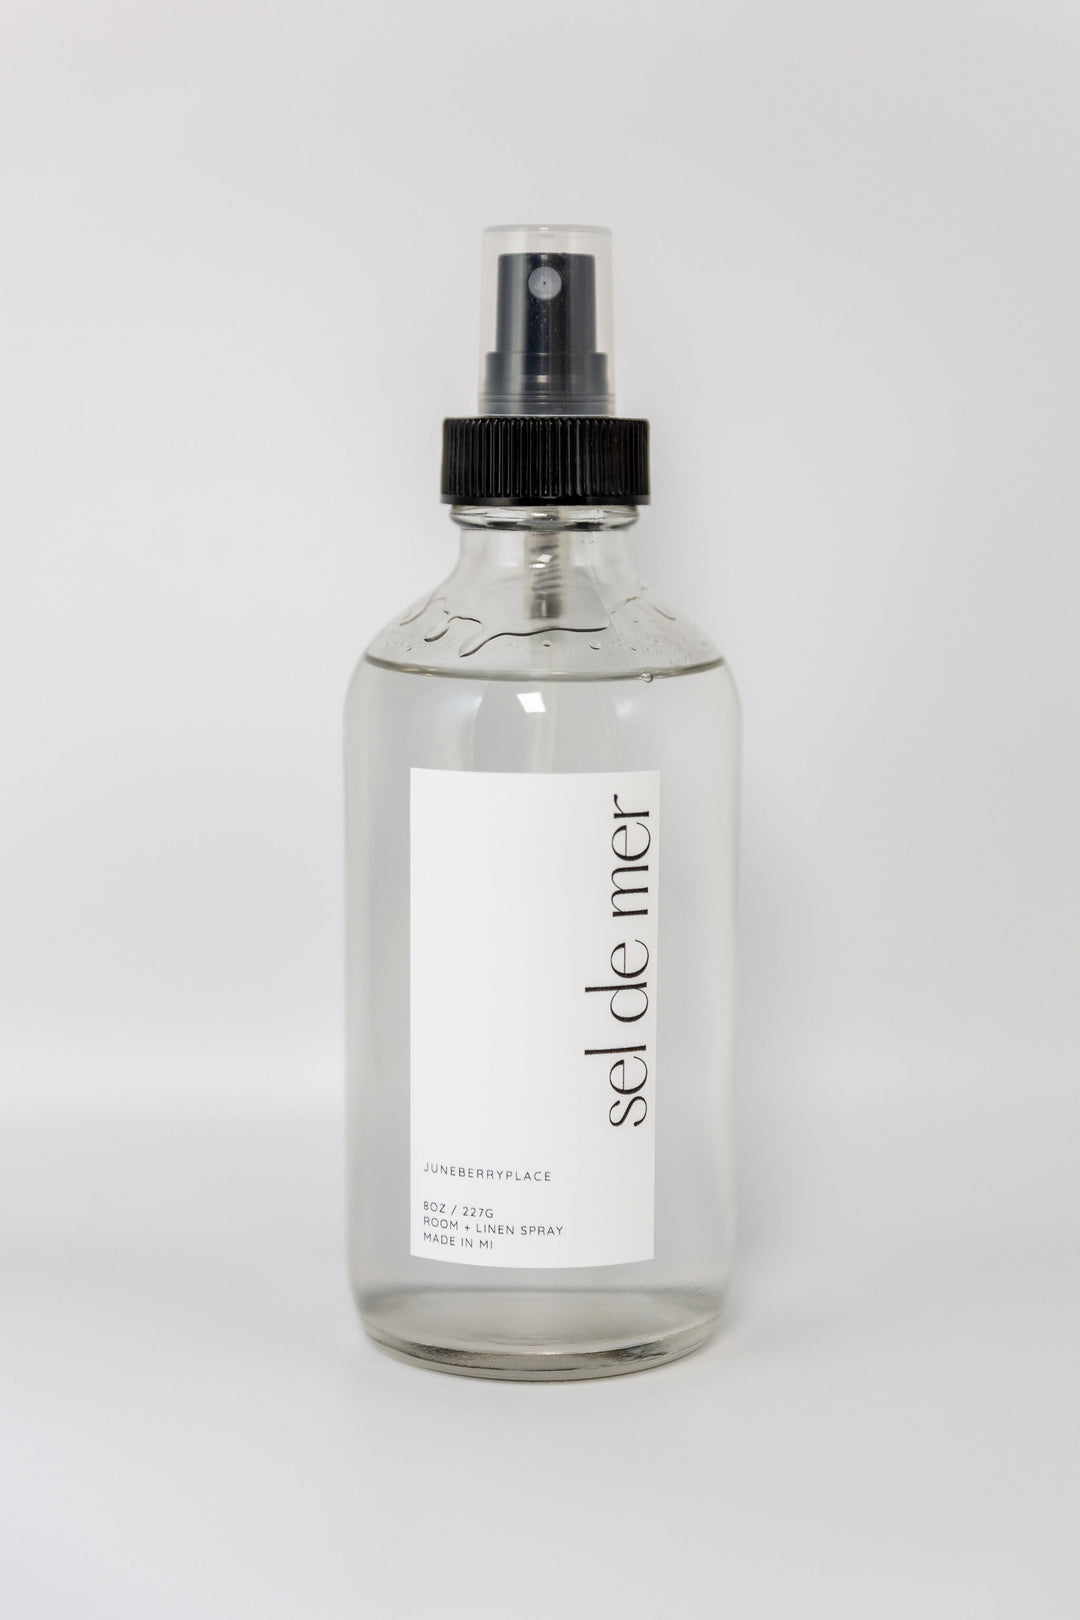 Sel de Mer Room + Linen Spray - Spring Collection in a glass bottle by juneberryplace home fragrances